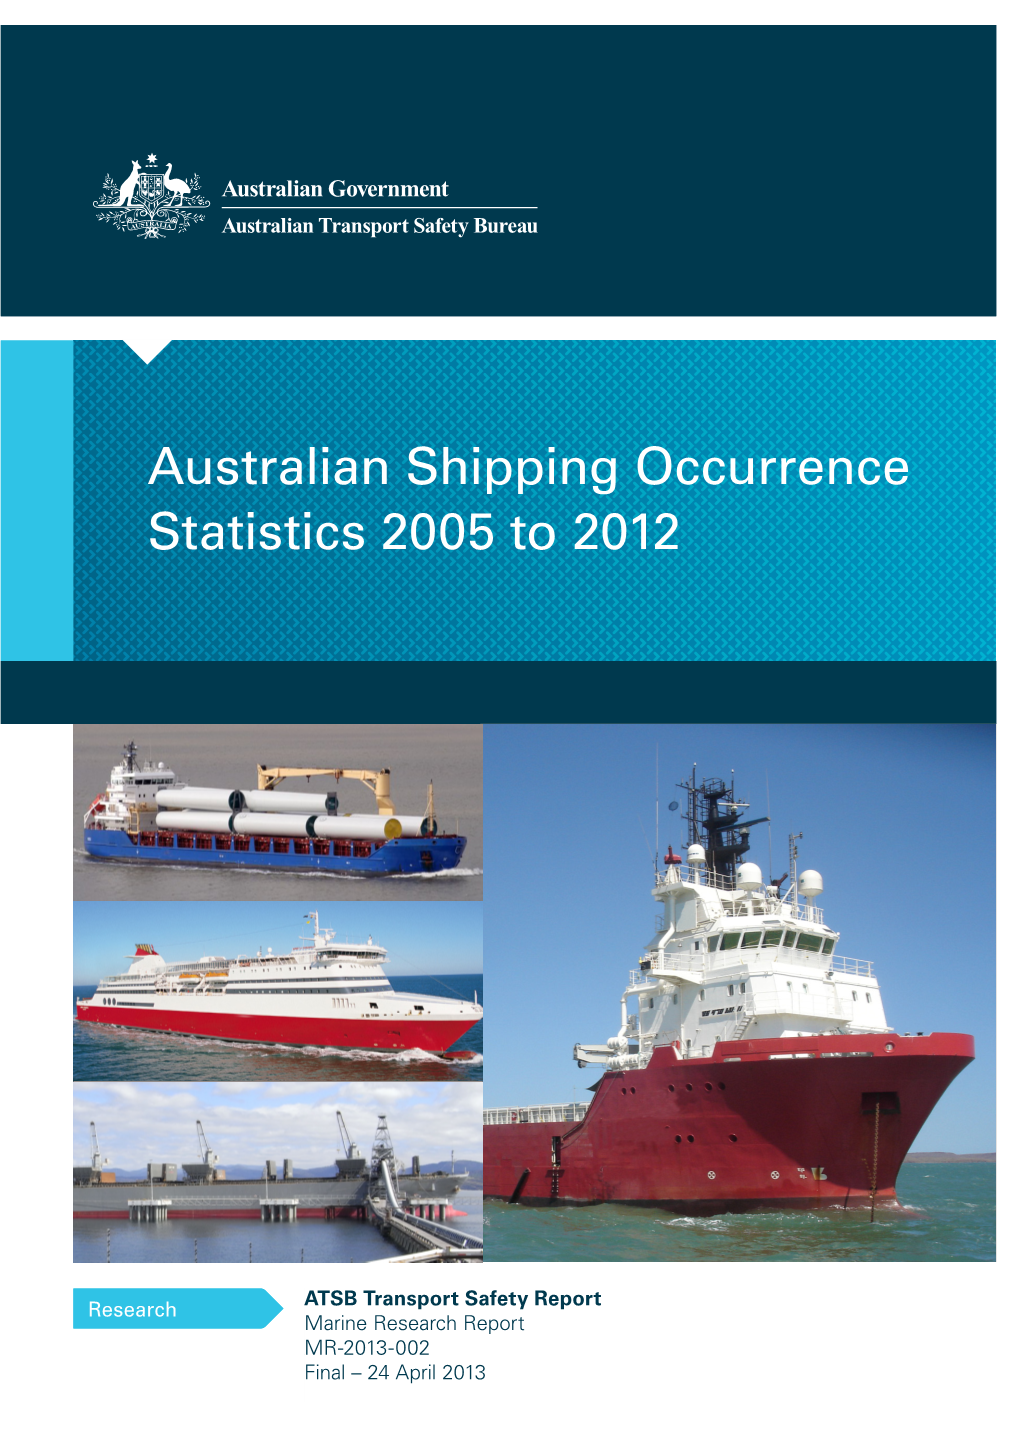 Australian Shipping Occurrence Statistics: 2005 to 2012